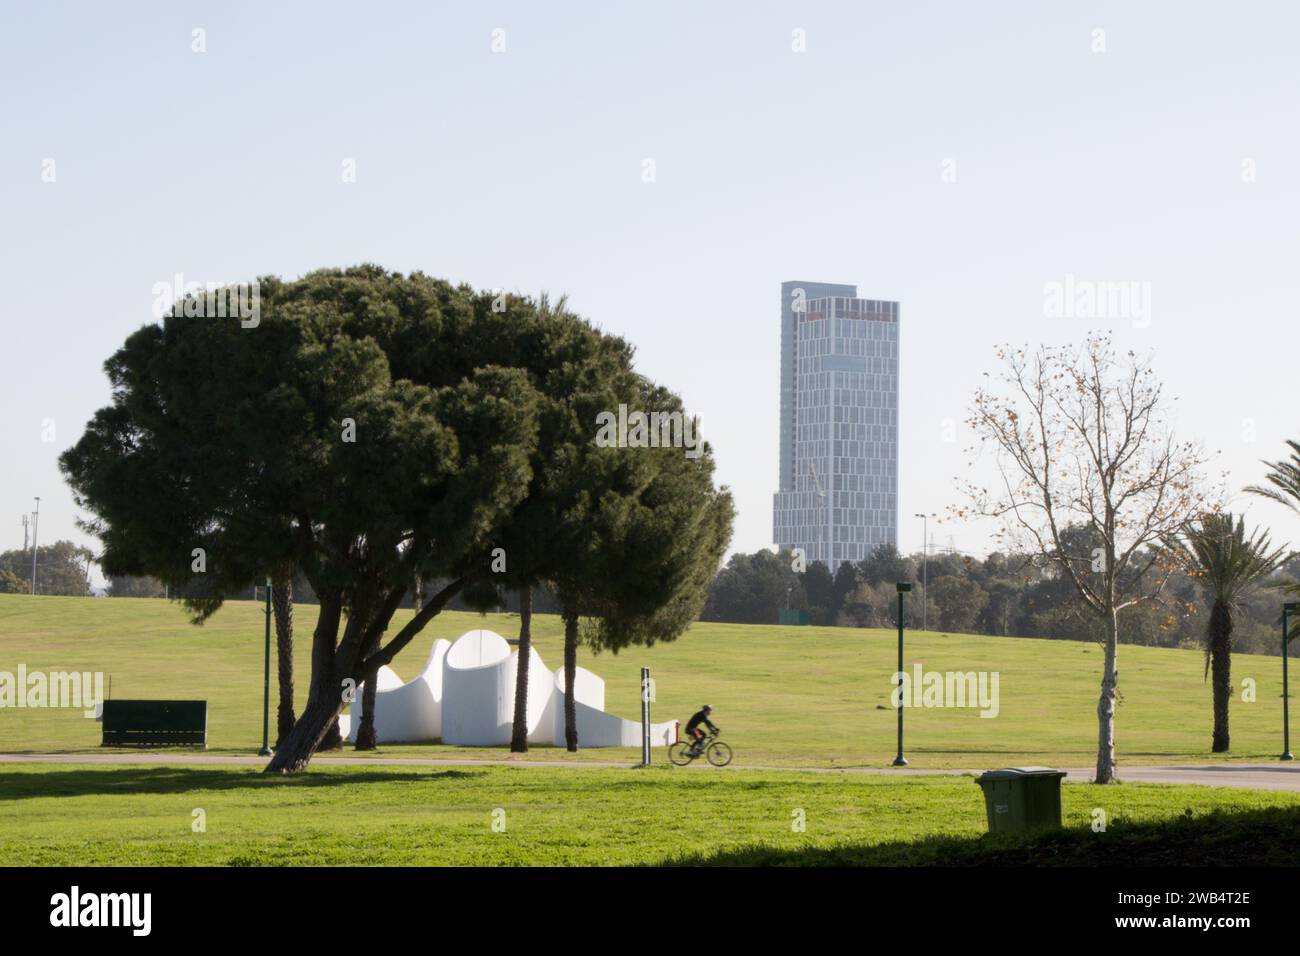 A large park in the city center with wide green lawns, bike ,walking and jogging paths. In the background are the office towers of the city. Stock Photo